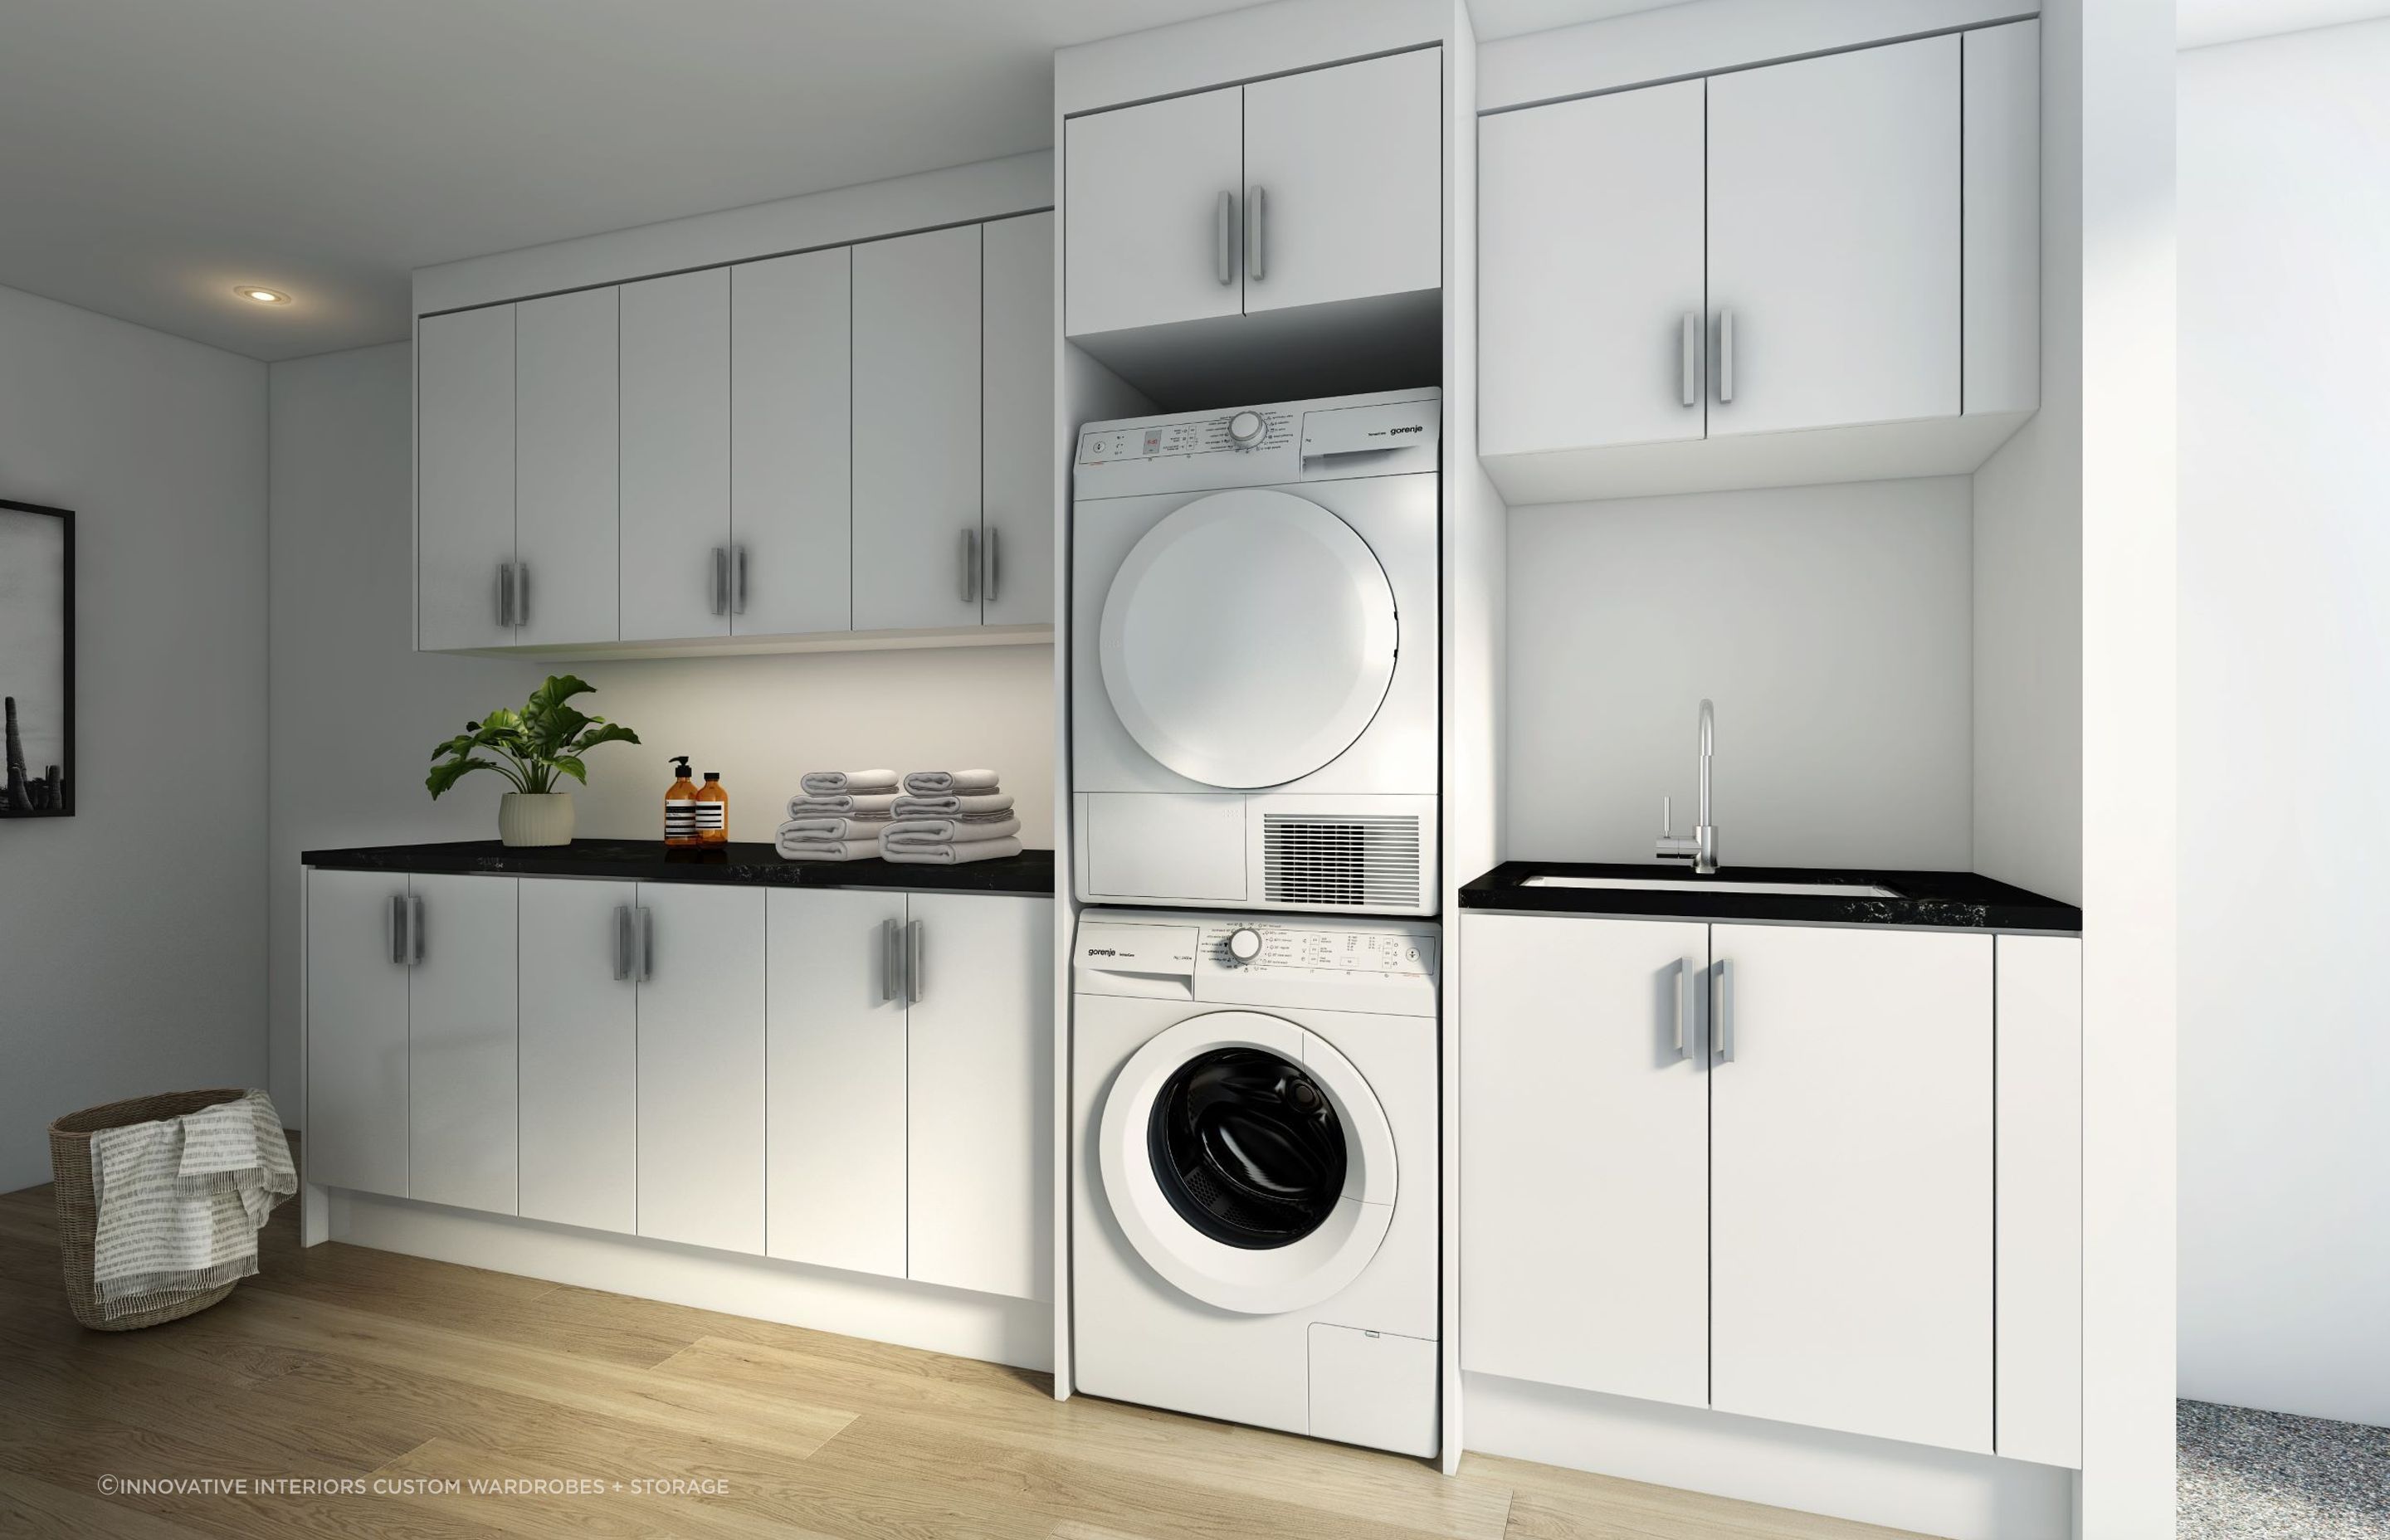 A stylish custom laundry storage solution featuring a stacker for the washer and dryer, a great option for saving space.